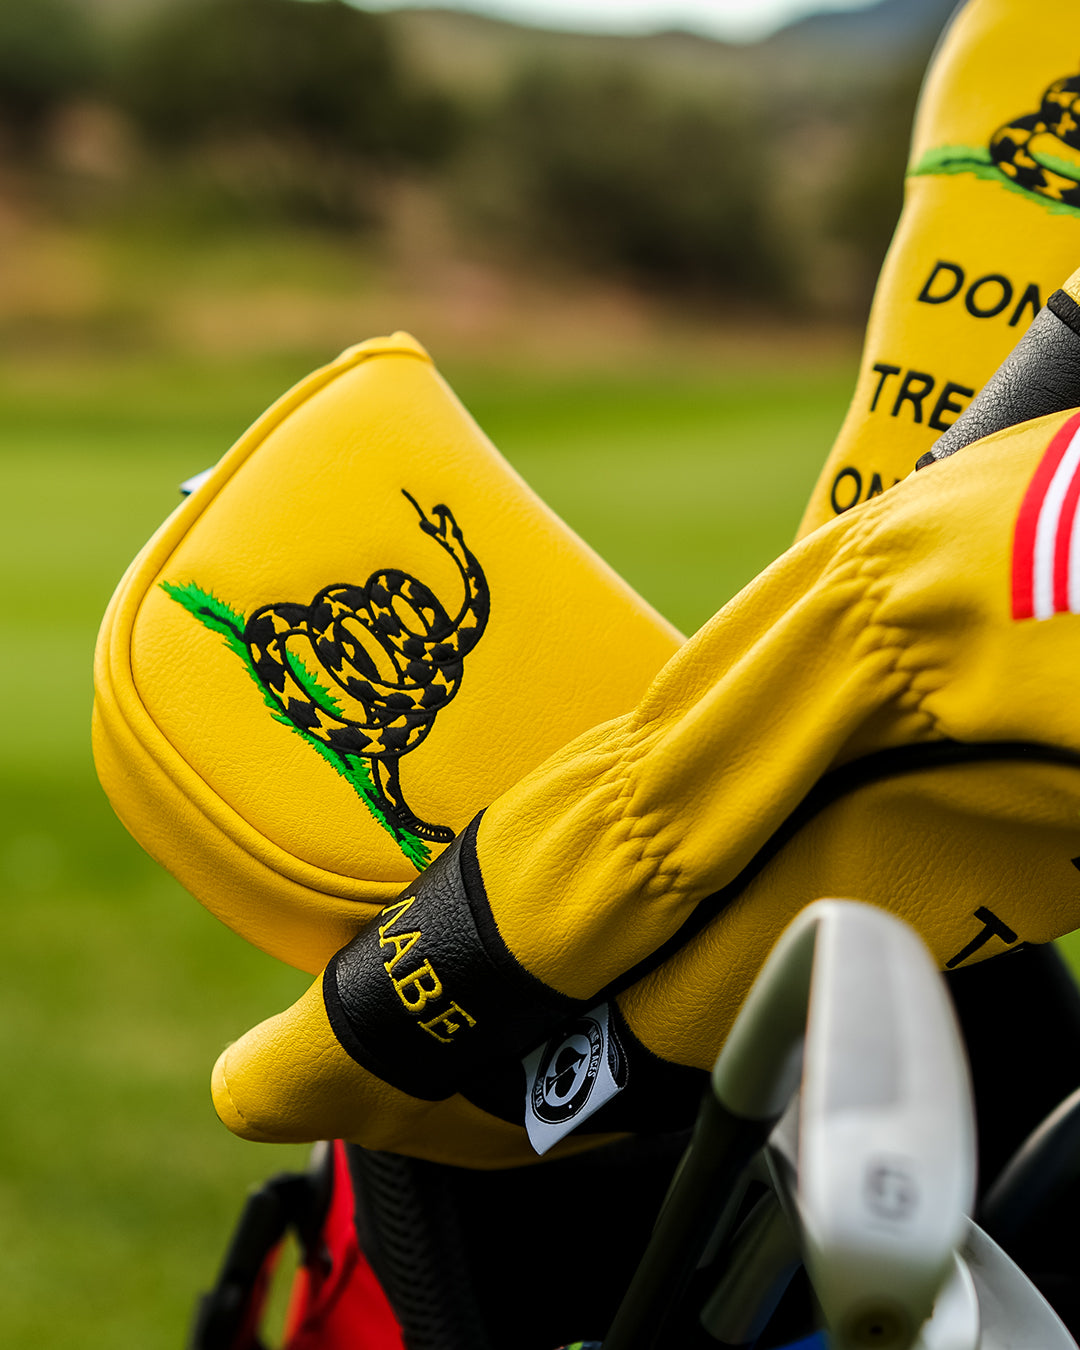 DONT TREAD ON ME - Mallet Putter Cover